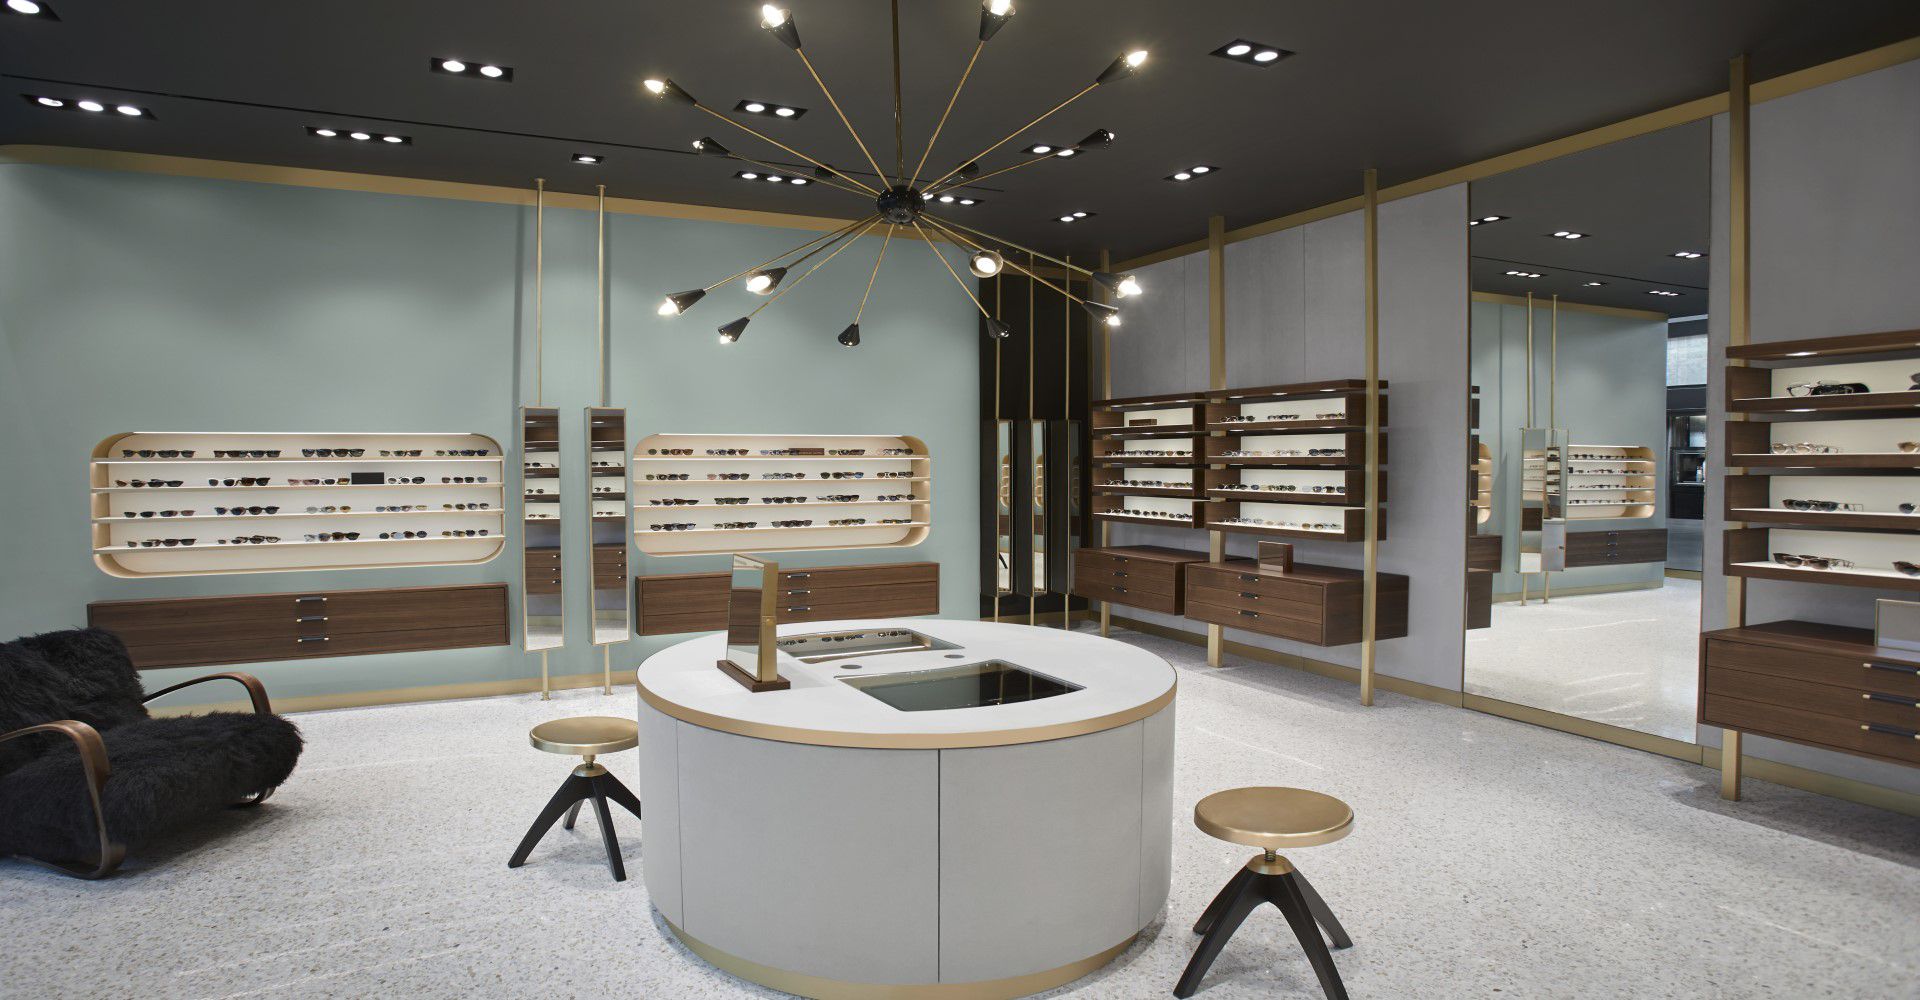 Oliver Peoples Yorkdale shopping